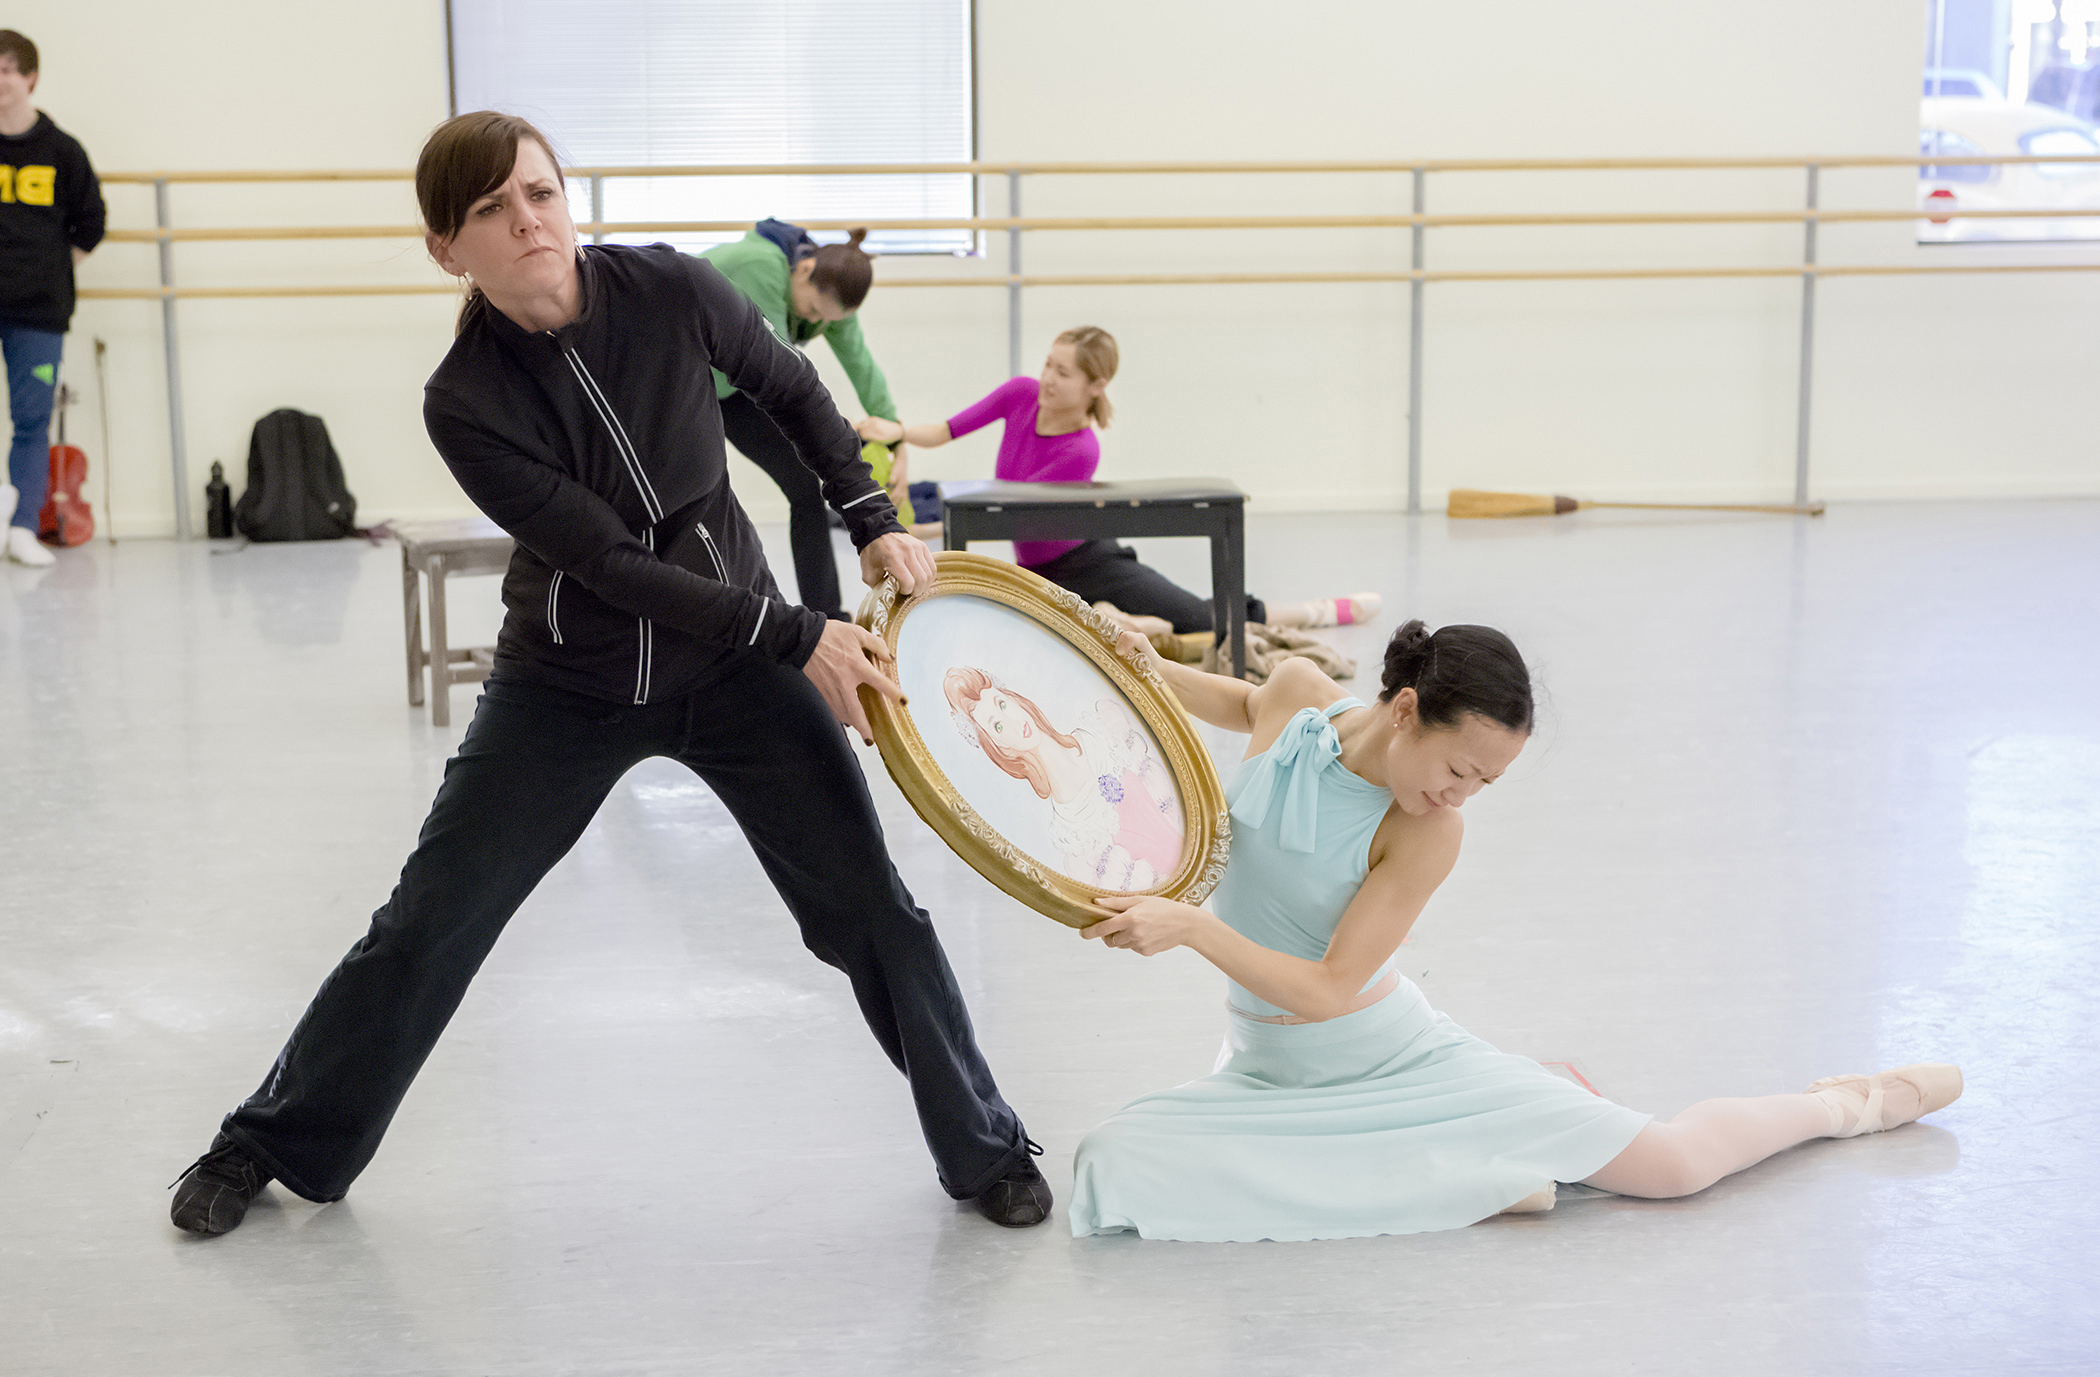 Left to right: Rehearsal Director Lisa Kipp (as Cinderella's Stepmother) and Xuan Cheng (as Cinderella) in rehearsal for the company premiere of Ben Stevenson's Cinderella. Photo by Blaine Truitt Covert. 